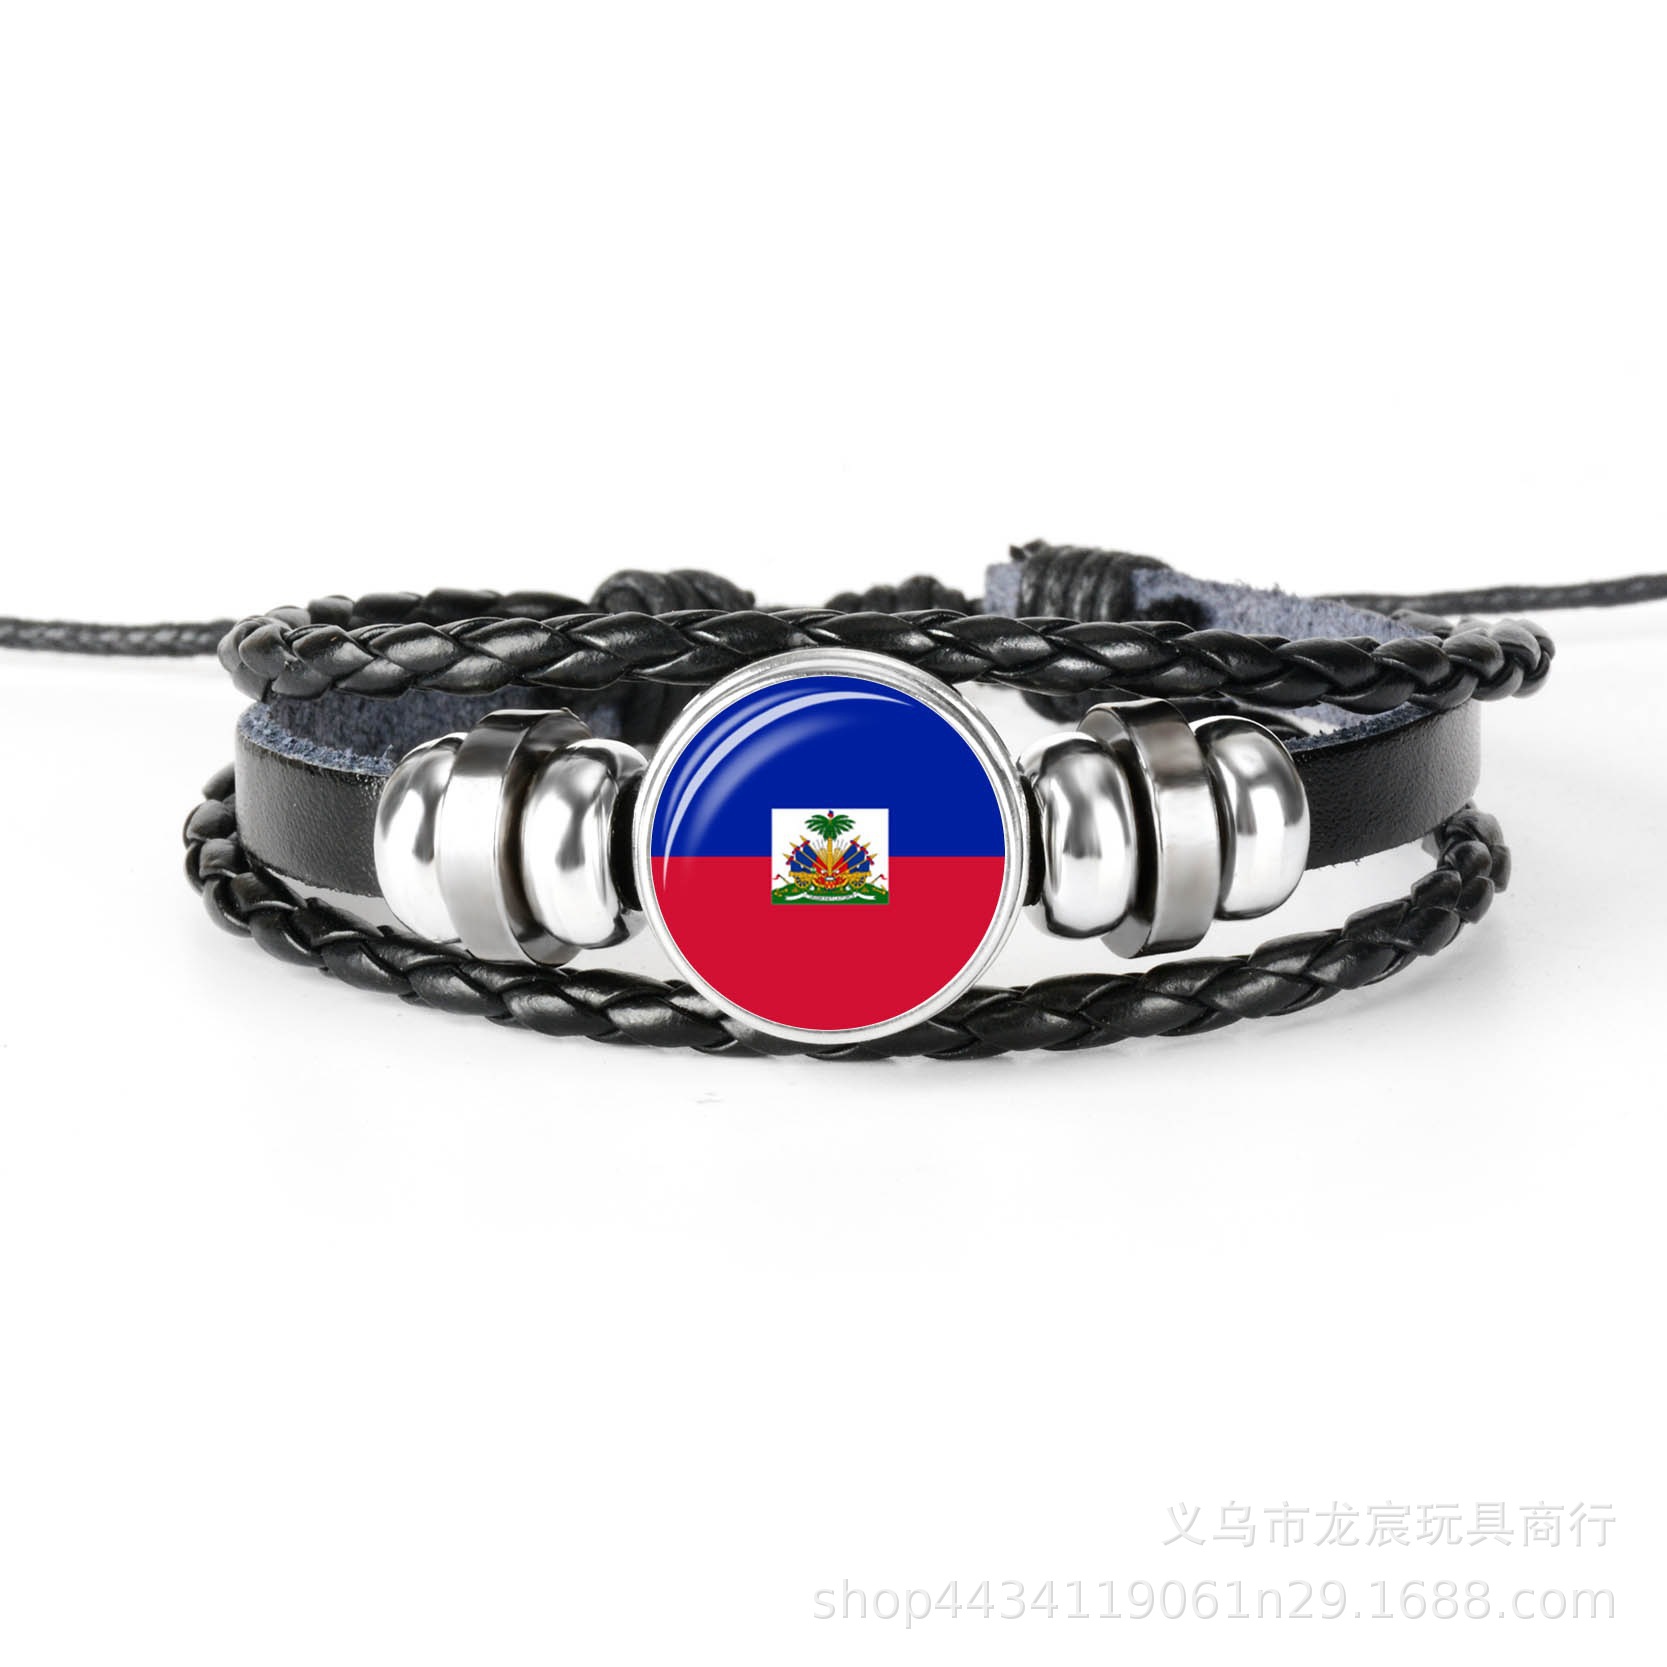 Supply Haitian National Flag Bracelet National Flag Time Stone Bracelet Personality Woven Cowhide String Hands